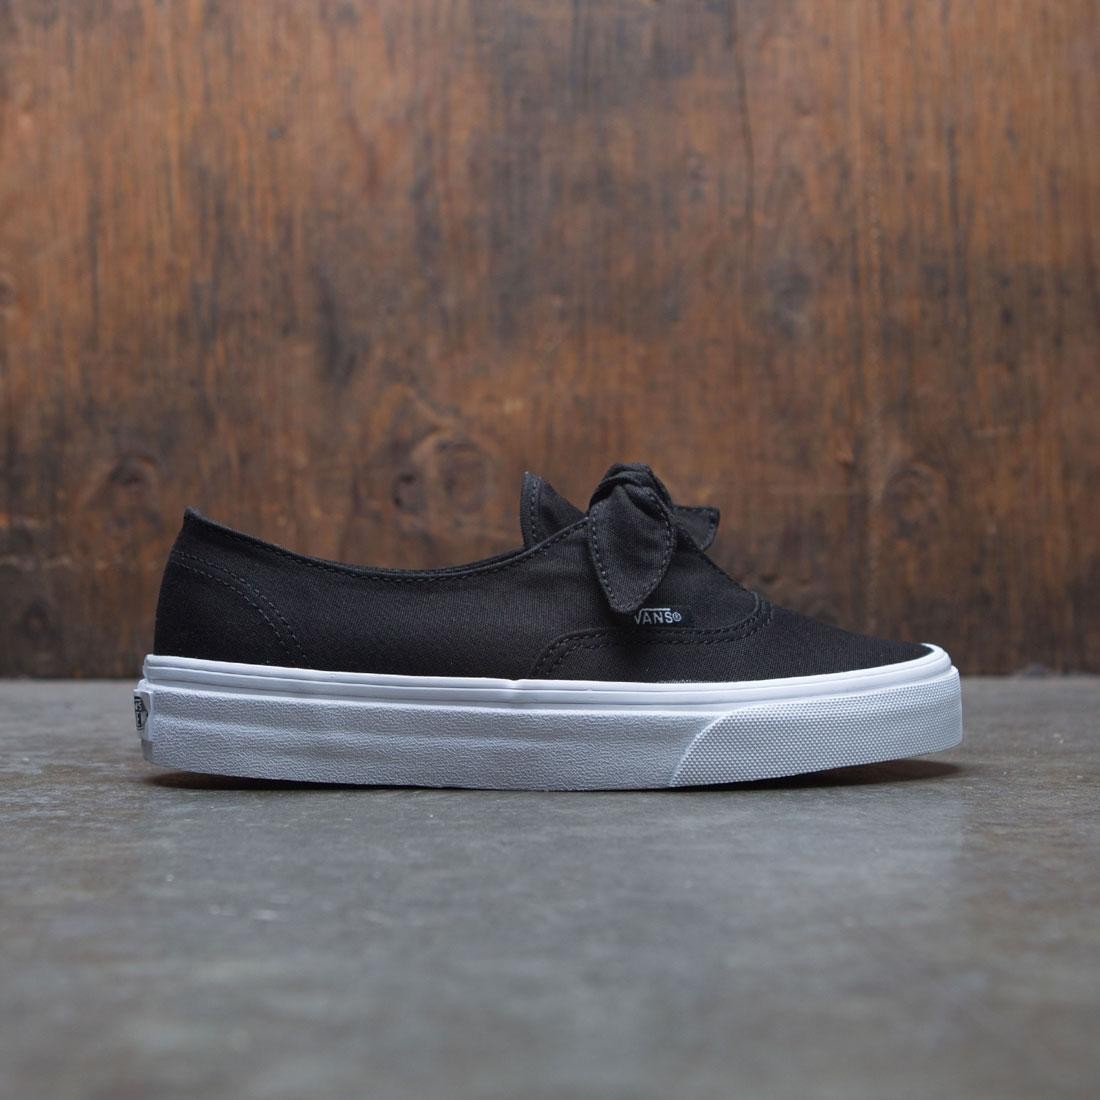 vans authentic knotted skate shoe